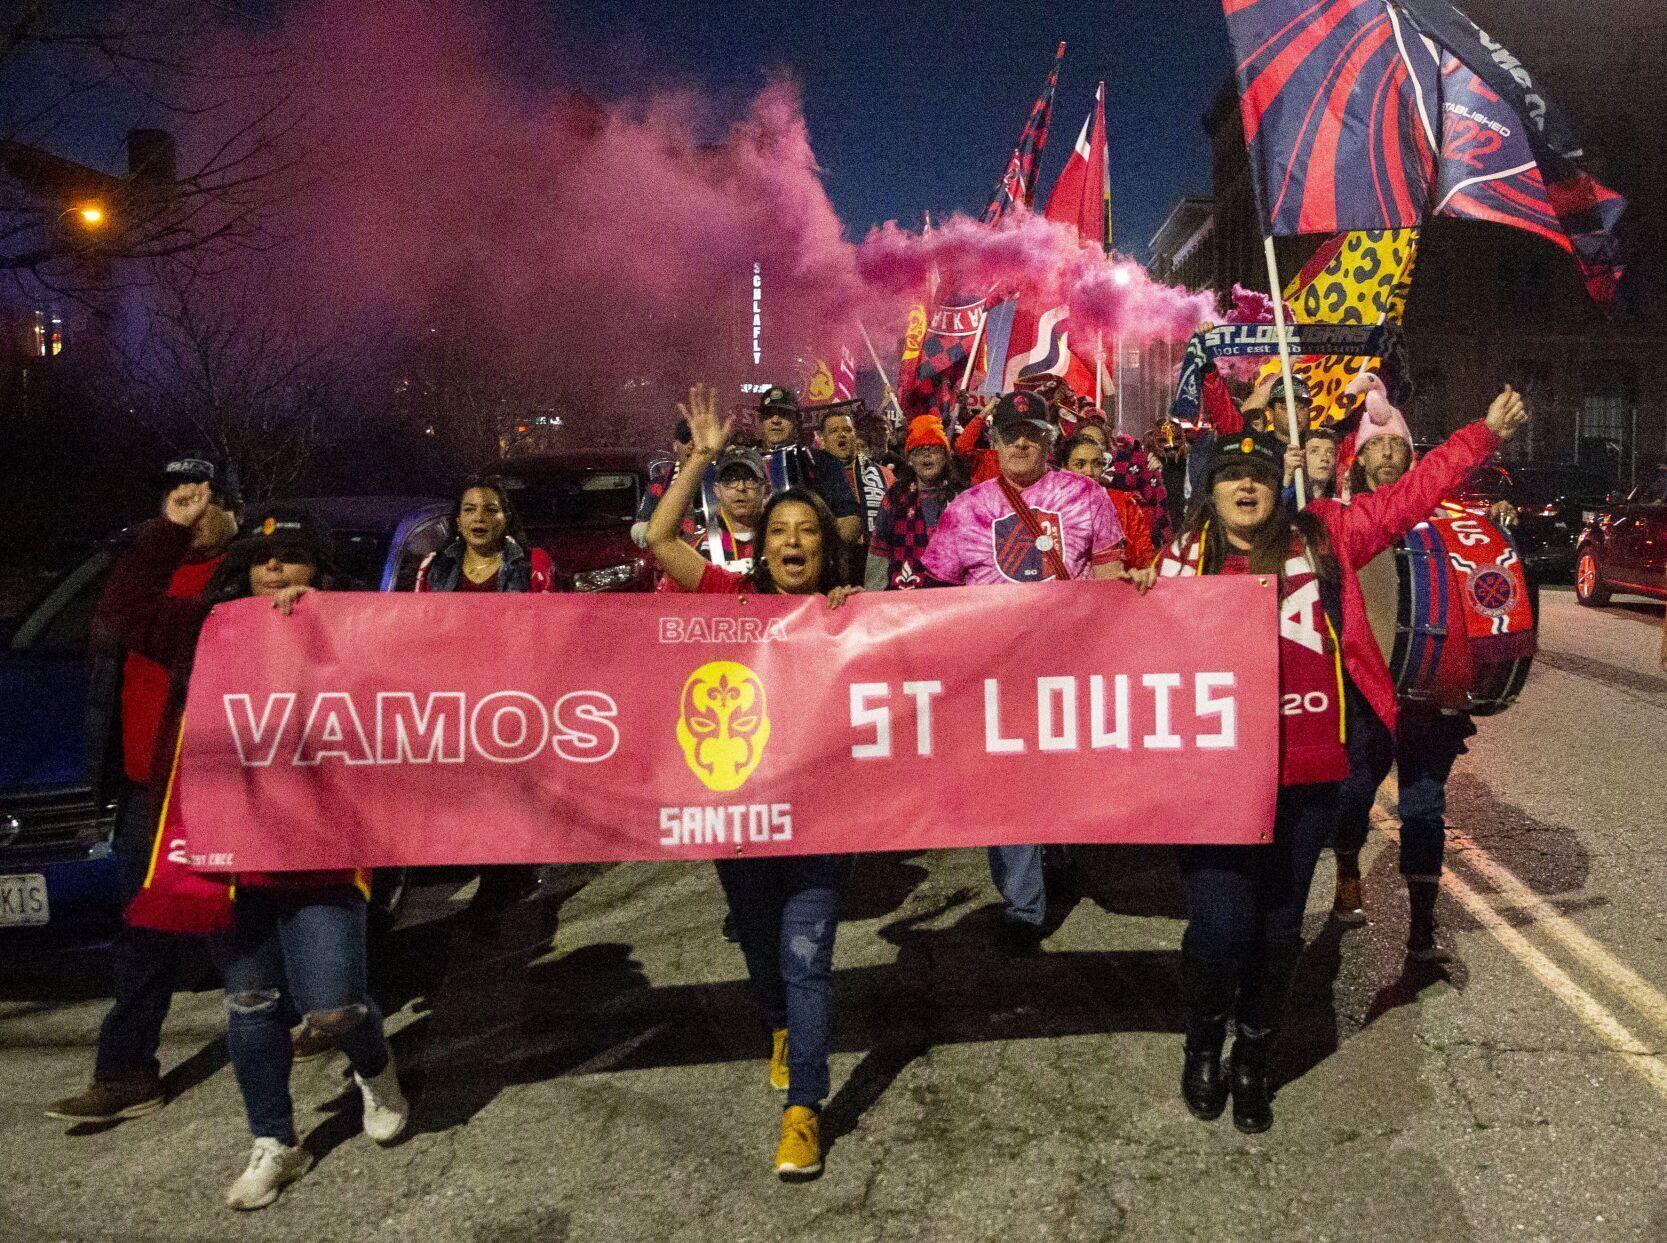 St. Louis CITY SC: 5 reasons they're setting MLS expansion history